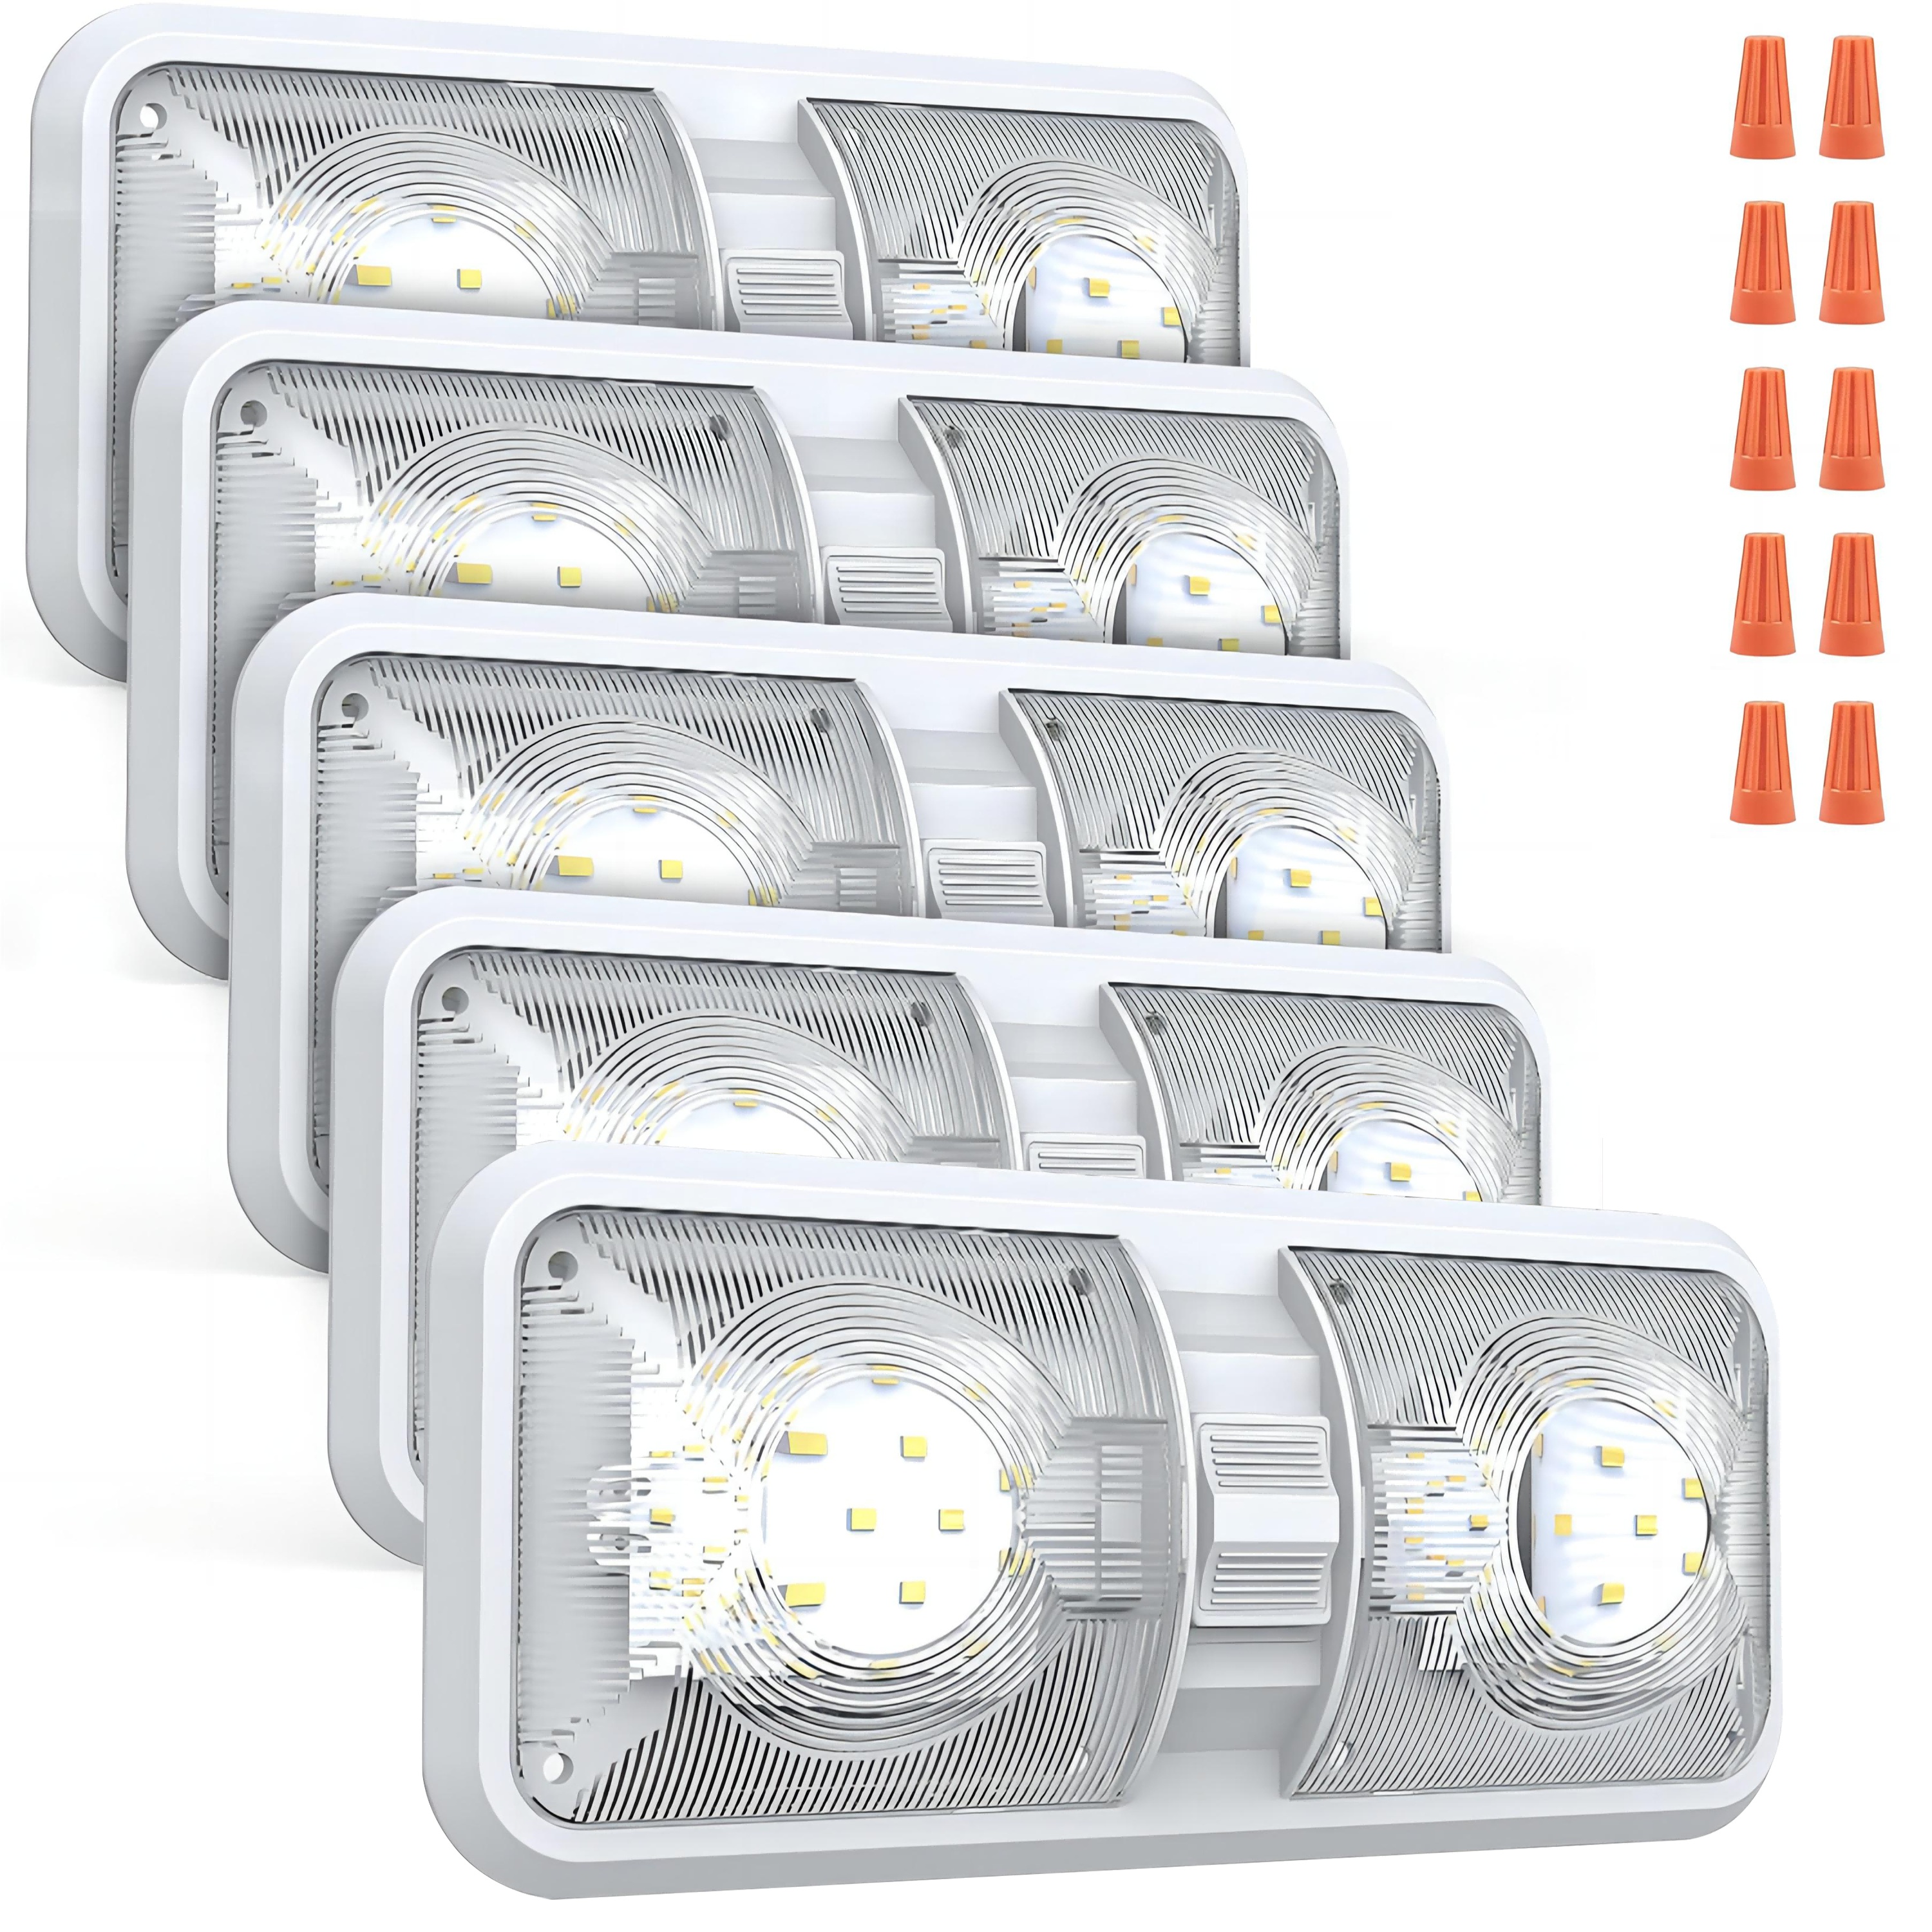 

1/2/5pcs Rv Interior Lights, 12v Led Lights 700lm, 8w Camping Lights, Rv Ceiling Double Dome Lights With Switches For Rv/camper/car/trailer/boat, Natural White